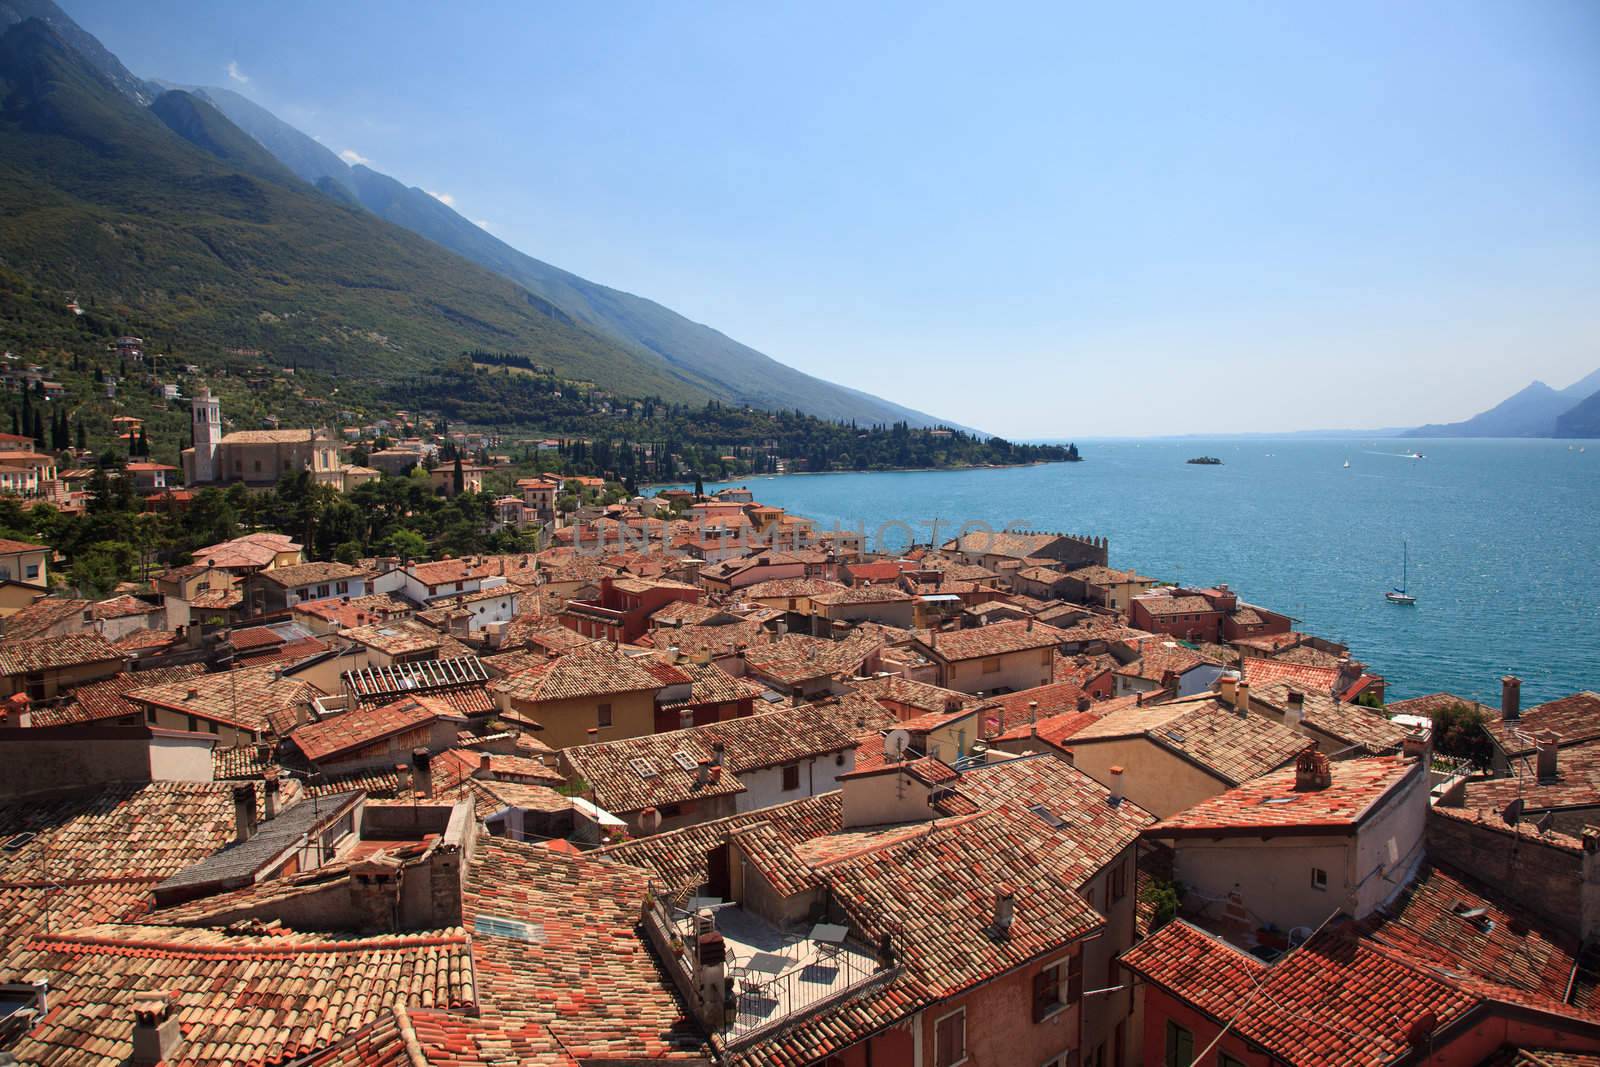 View over Lake Garda over the tiled roofs of Malcesine